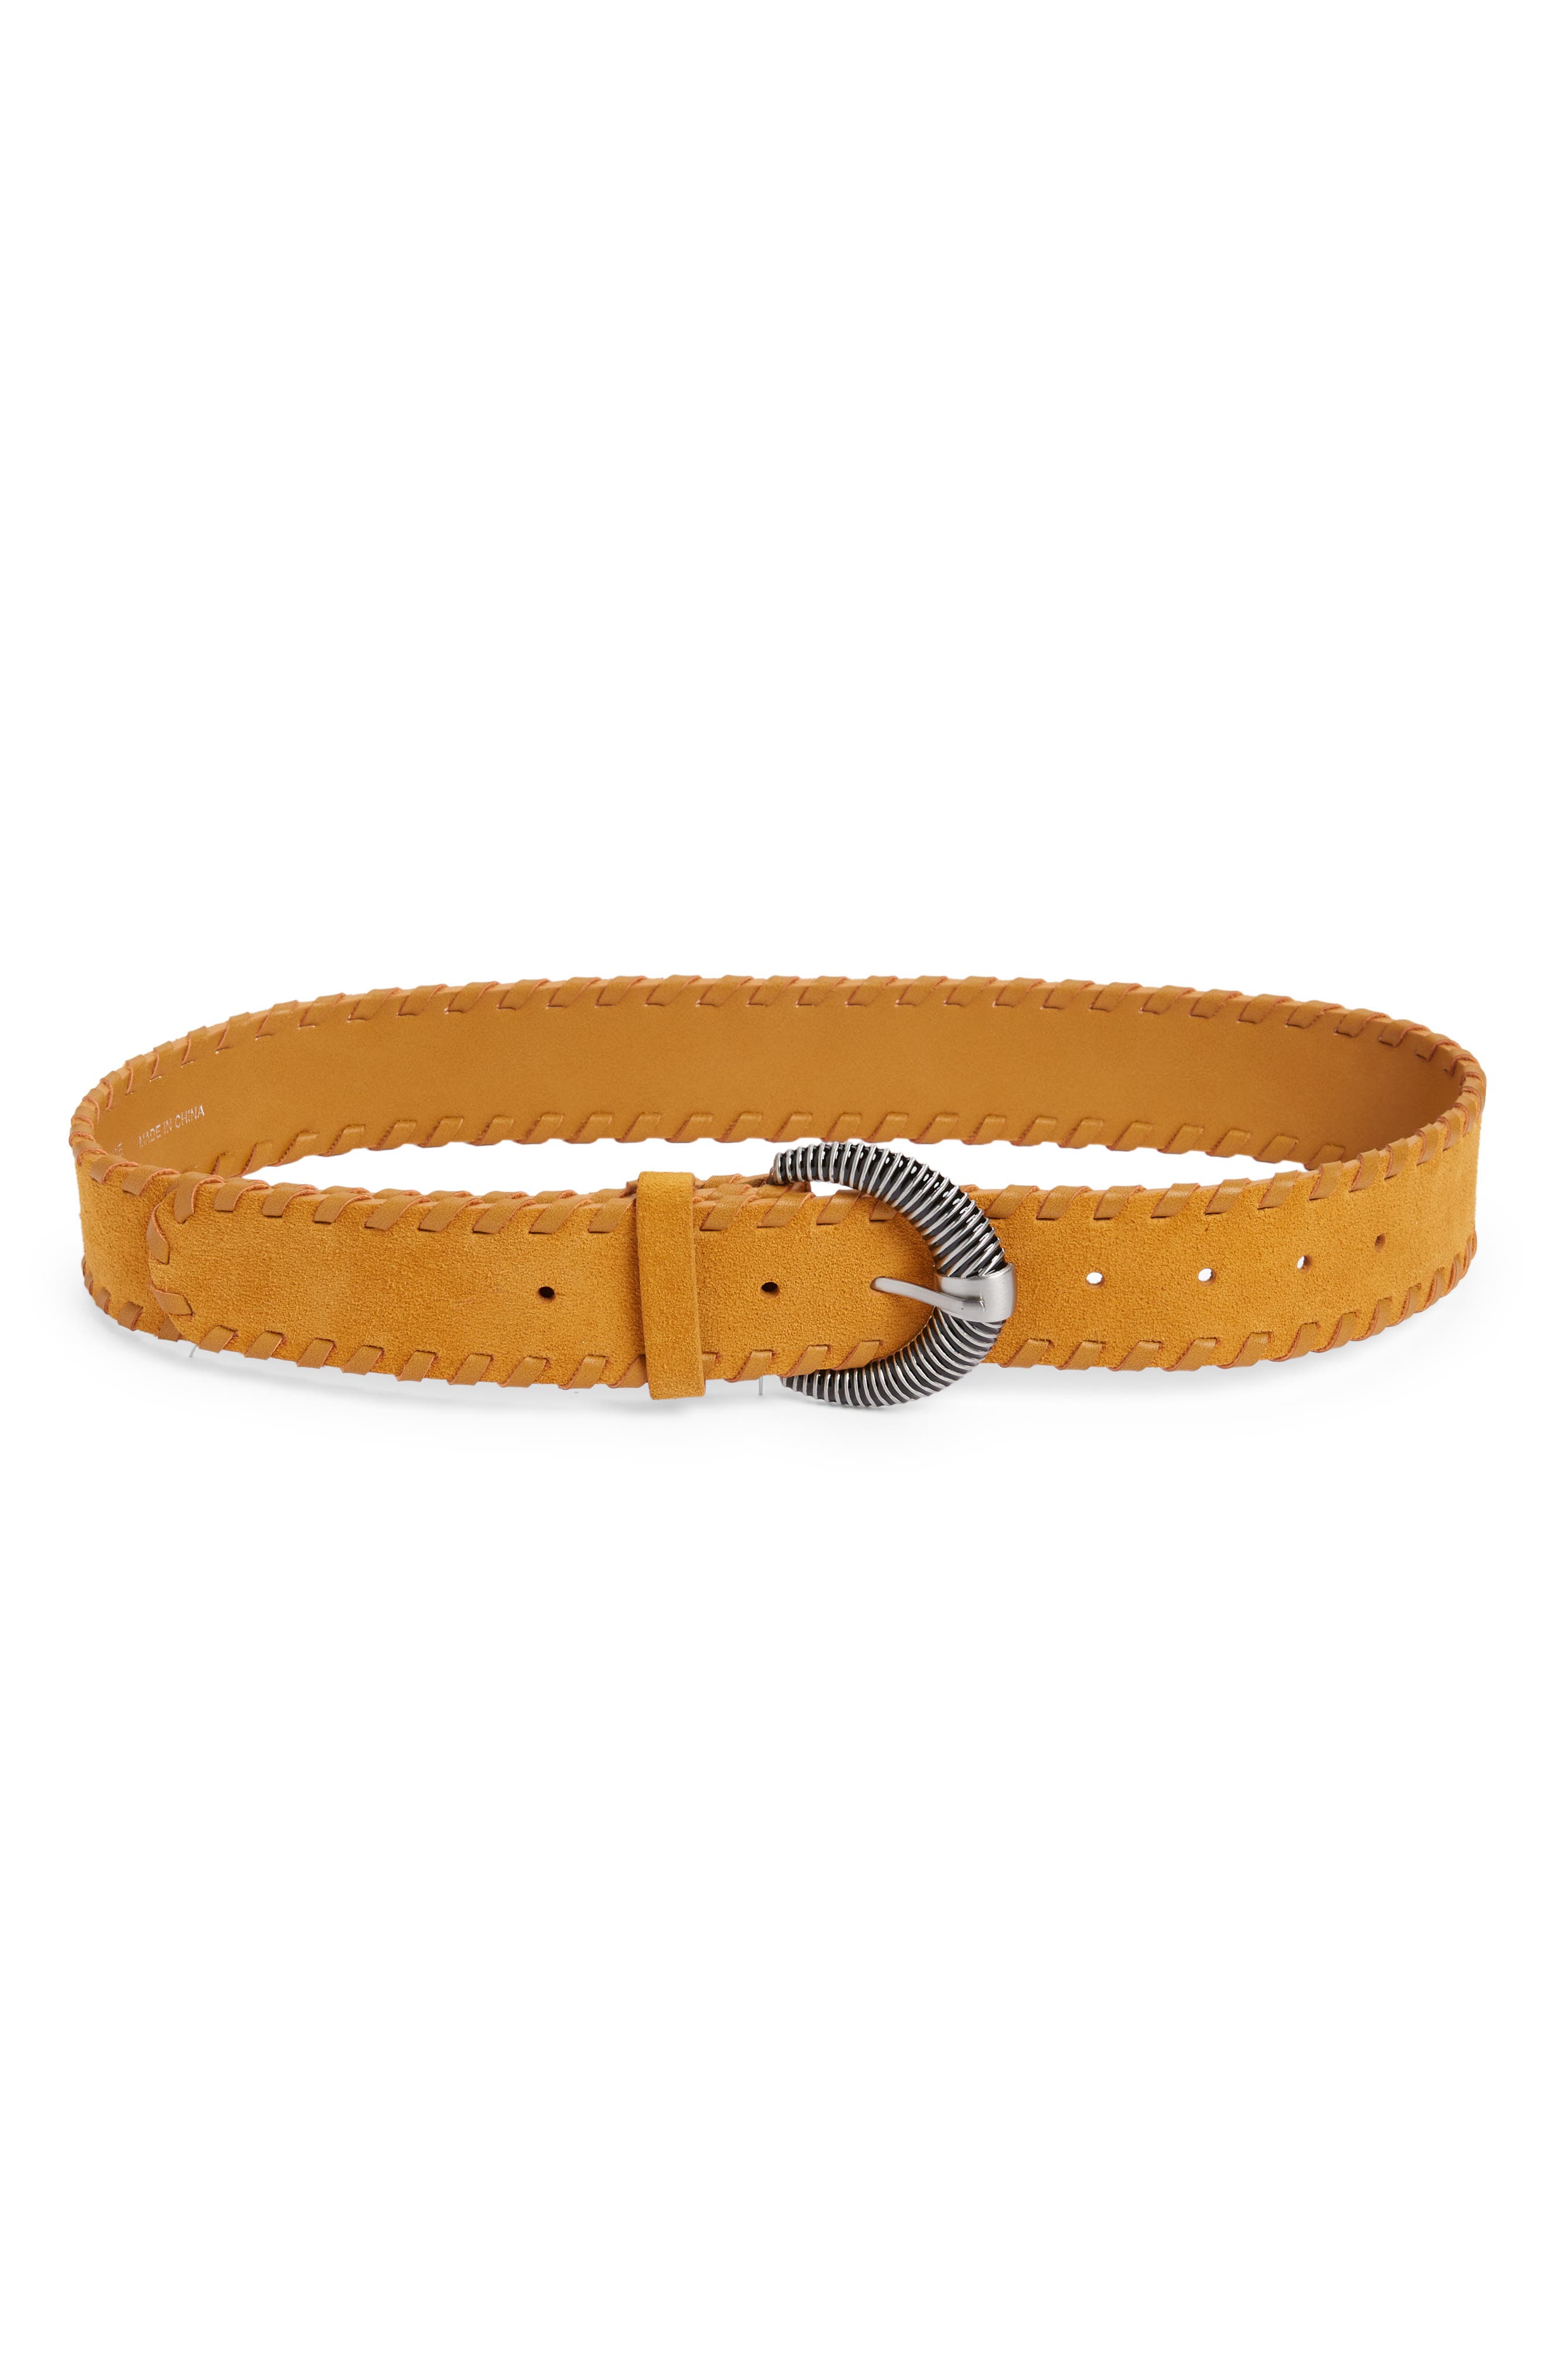 Yellow Suede Belt made in the USA